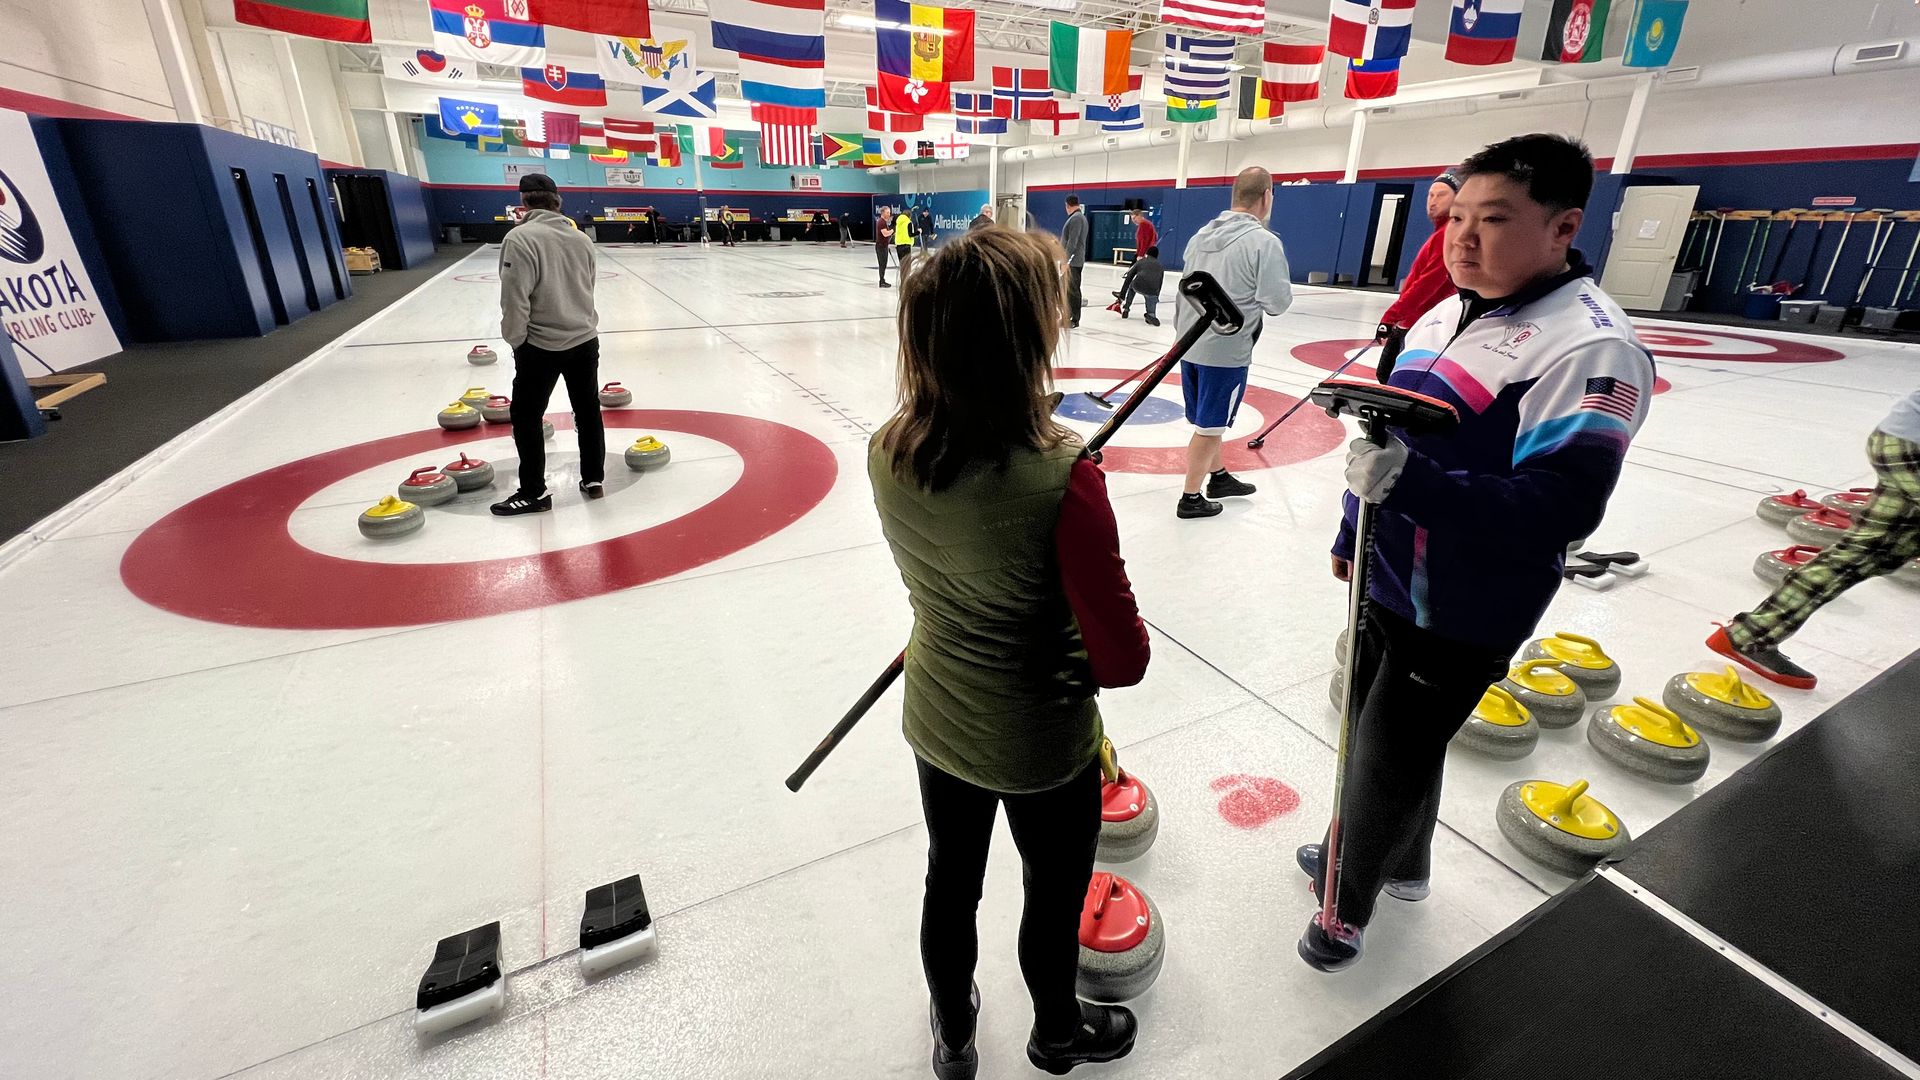 Two players stand on a curling rink — a white sheet of ice with bullseye-shaped targets of red rings, with special grey curling stones with yellow and red tops. The players are in conversation and holding curling brooms, which have flat heads and no bristles.